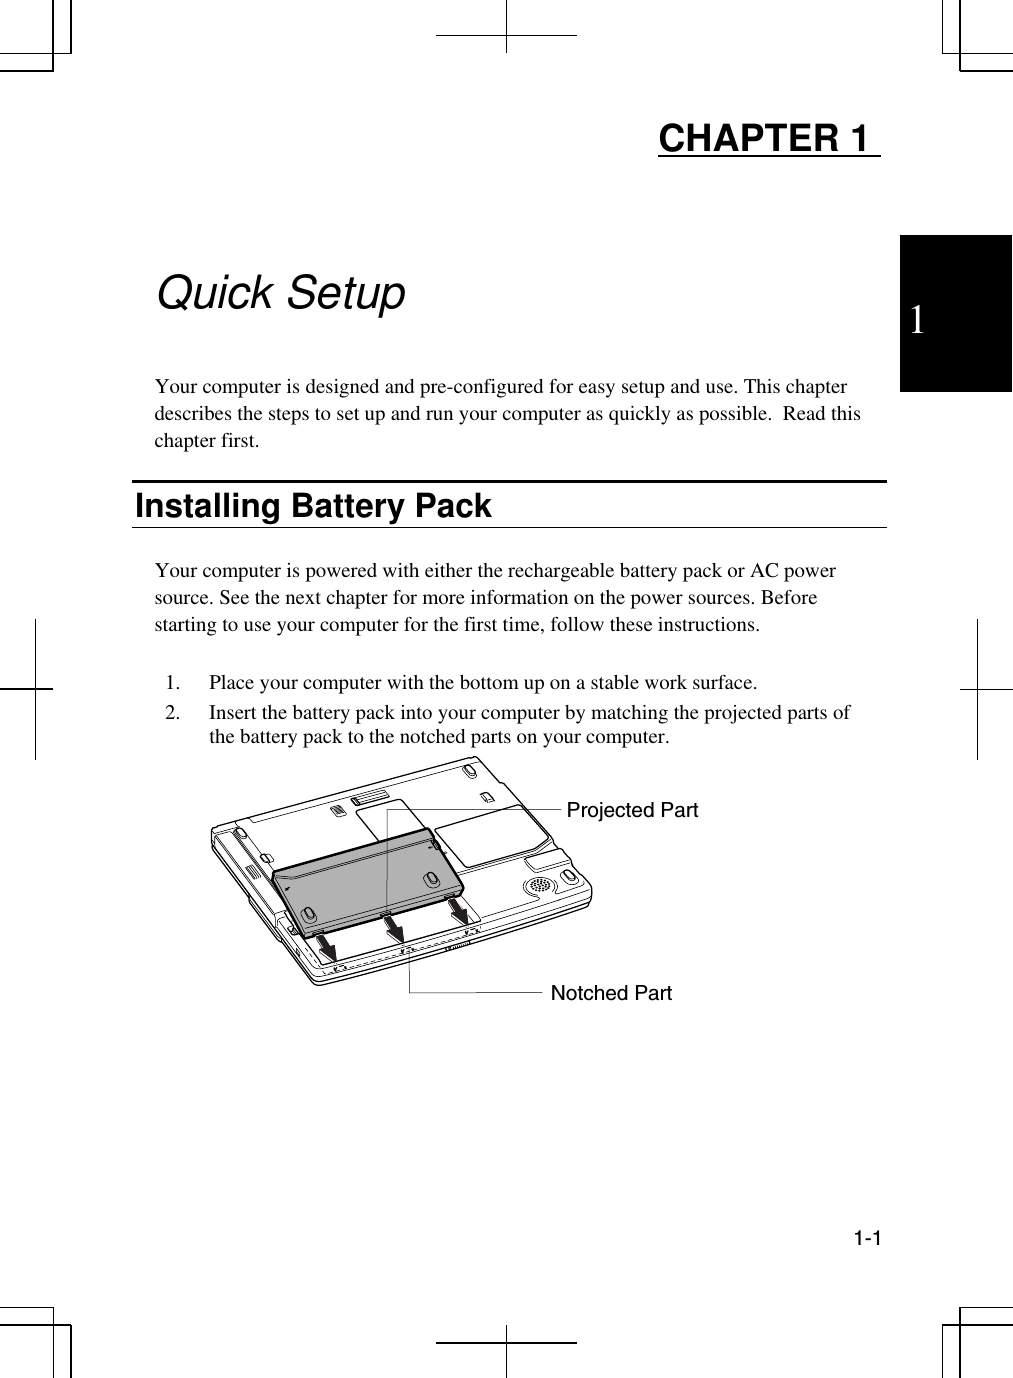 1  1-1  CHAPTER 1     Quick Setup  Your computer is designed and pre-configured for easy setup and use. This chapter describes the steps to set up and run your computer as quickly as possible.  Read this chapter first.  Installing Battery Pack  Your computer is powered with either the rechargeable battery pack or AC power source. See the next chapter for more information on the power sources. Before starting to use your computer for the first time, follow these instructions.  1.  Place your computer with the bottom up on a stable work surface. 2.  Insert the battery pack into your computer by matching the projected parts of the battery pack to the notched parts on your computer.   Notched Part Projected Part 